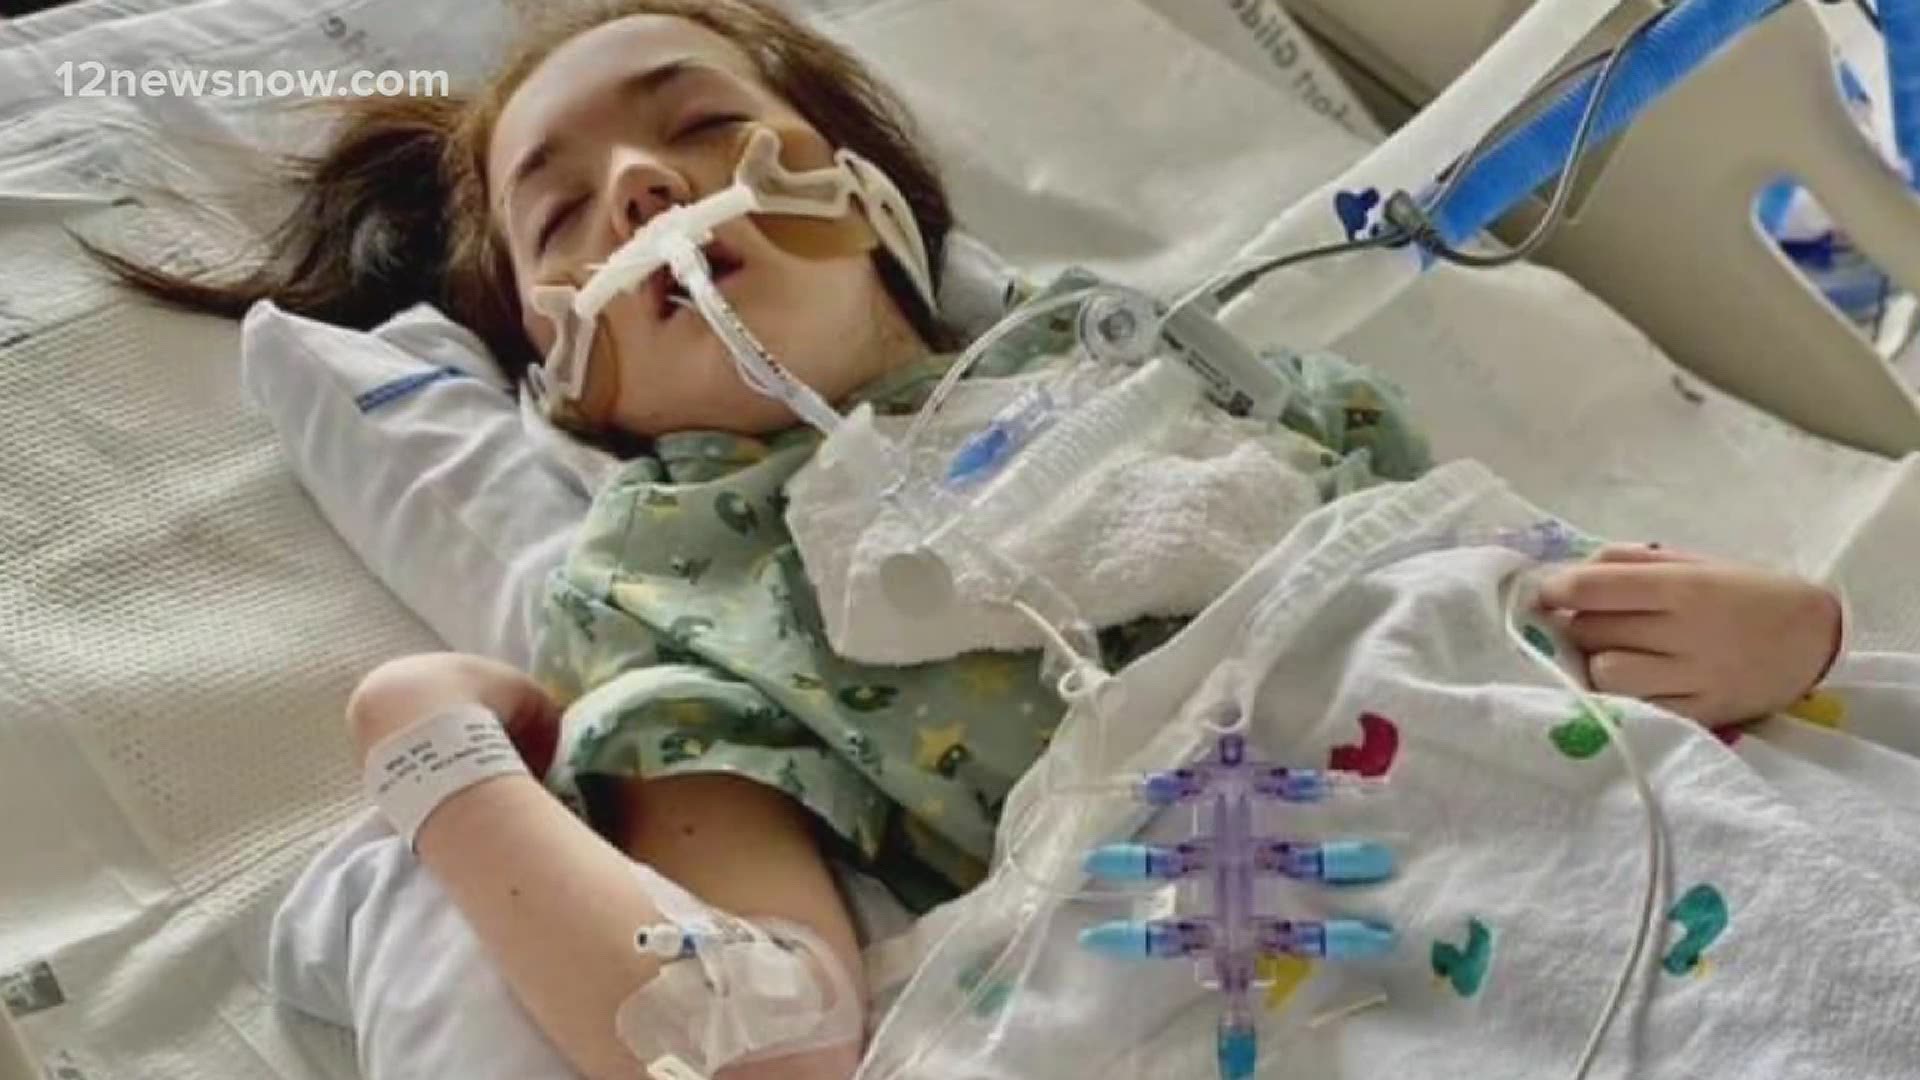 Kevin's daughter has been at Texas Children's Hospital since last week